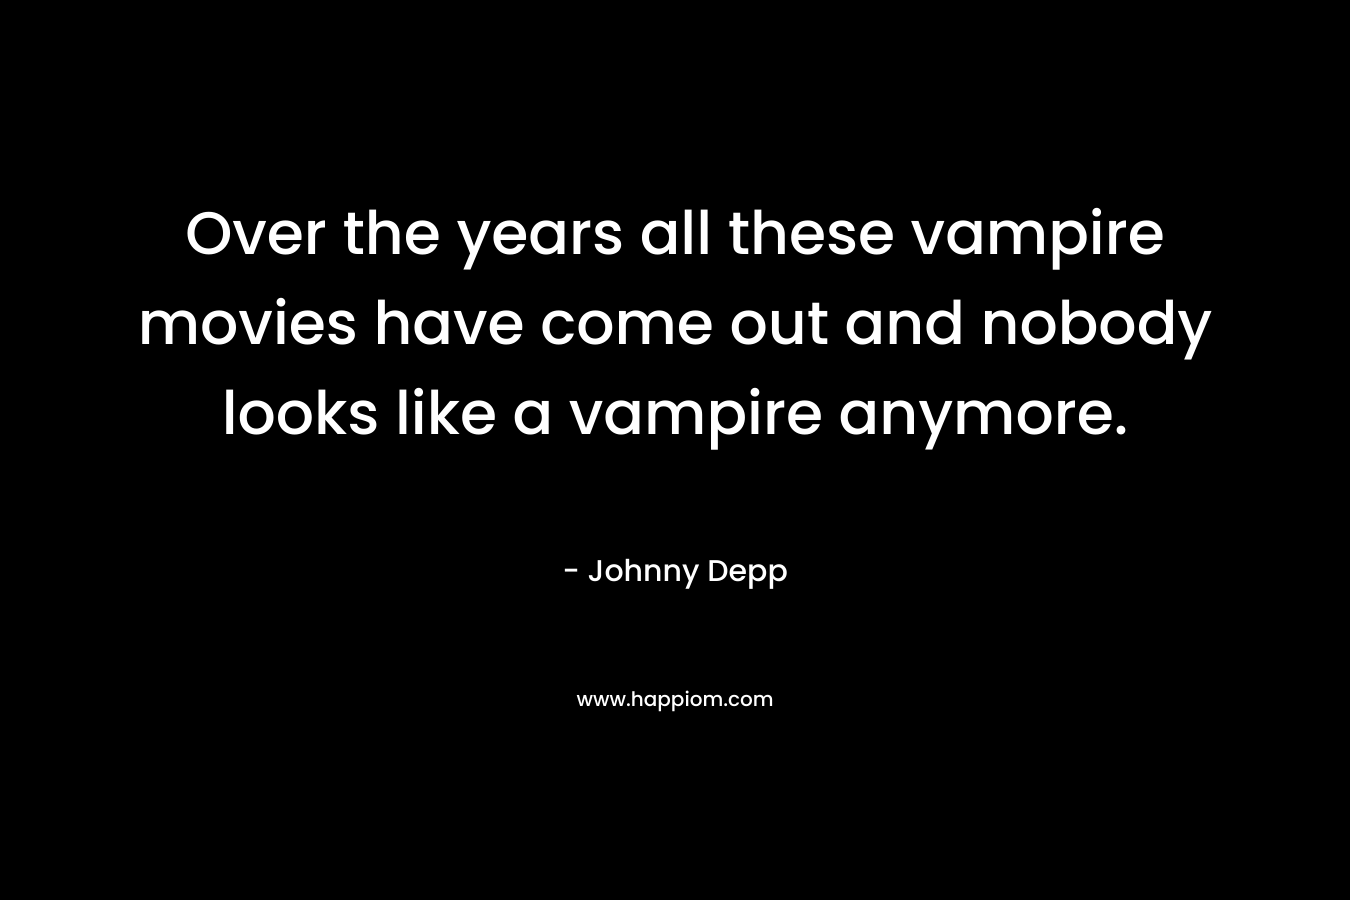 Over the years all these vampire movies have come out and nobody looks like a vampire anymore.